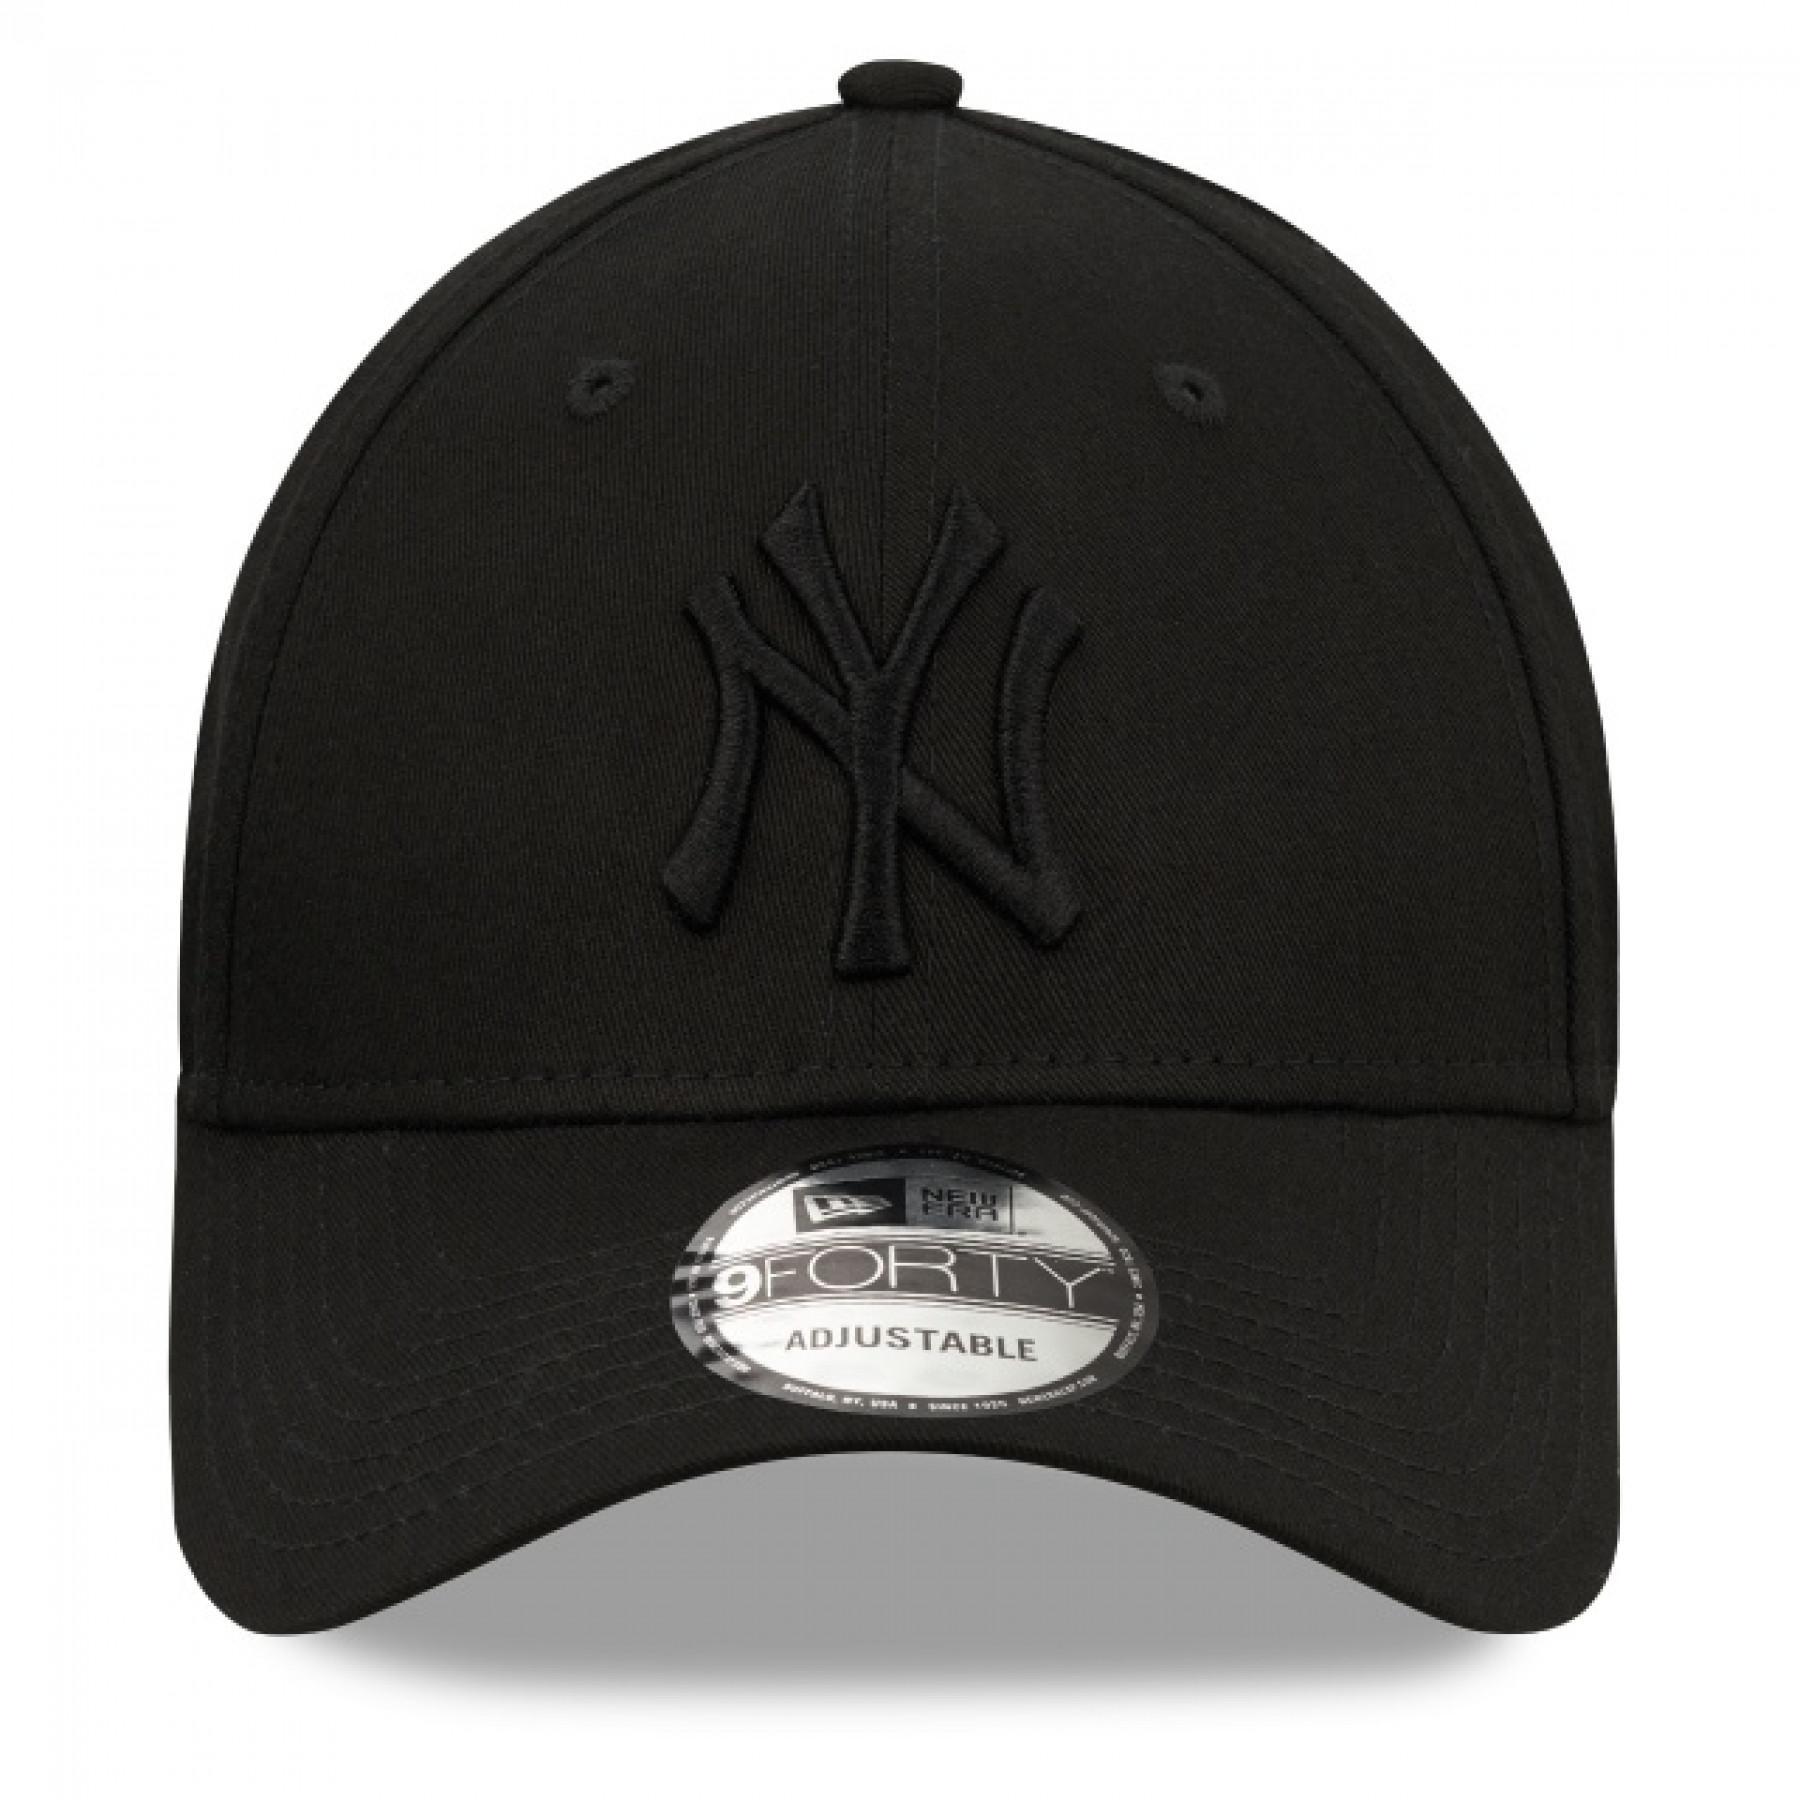 Casquette New Era Yankees 9forty